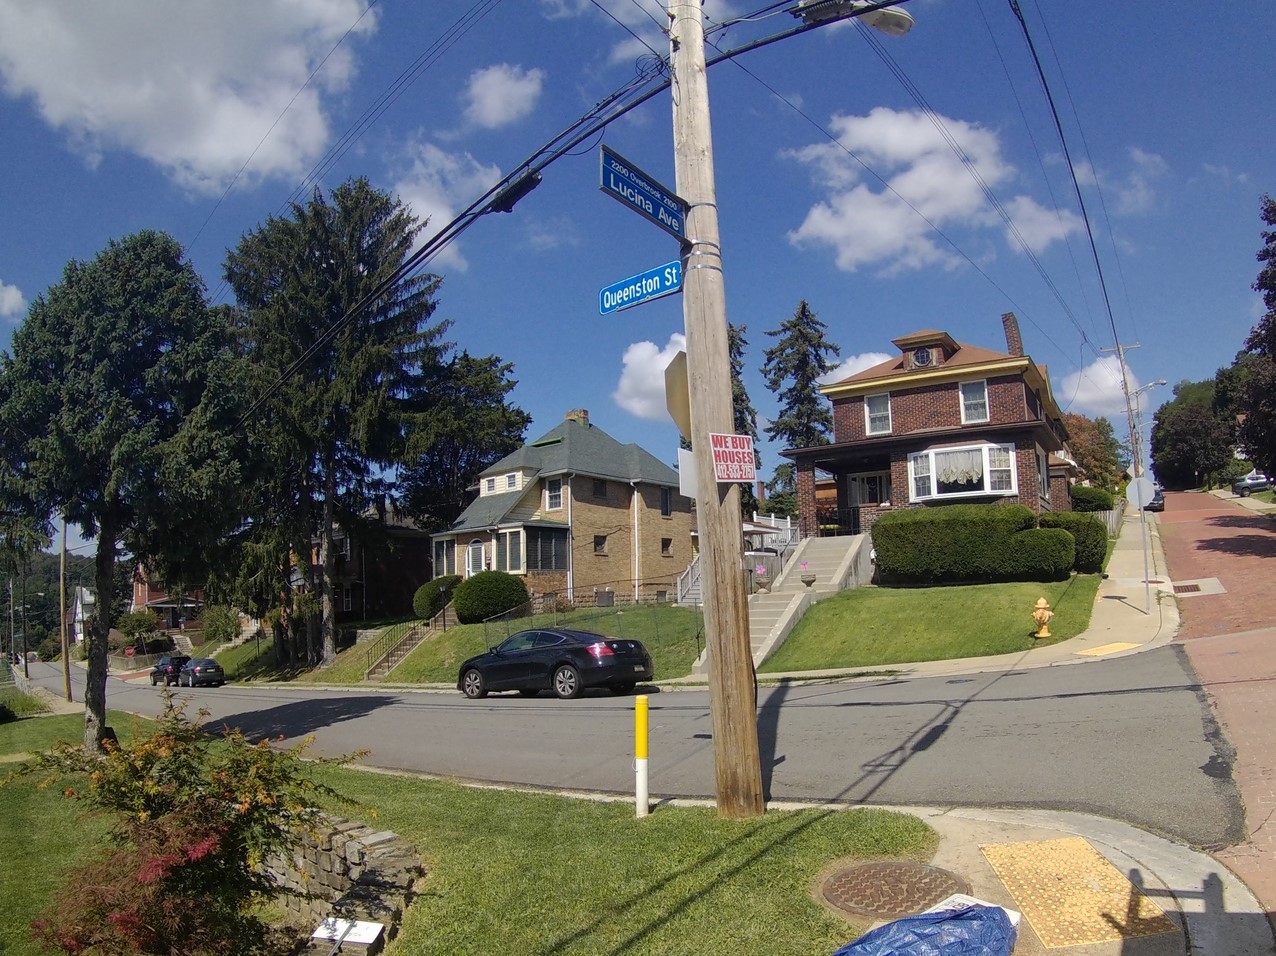 Photo of the intersection of Queenston Street and Lucina Avenue in the Carrick neighborhood of Pittsburgh